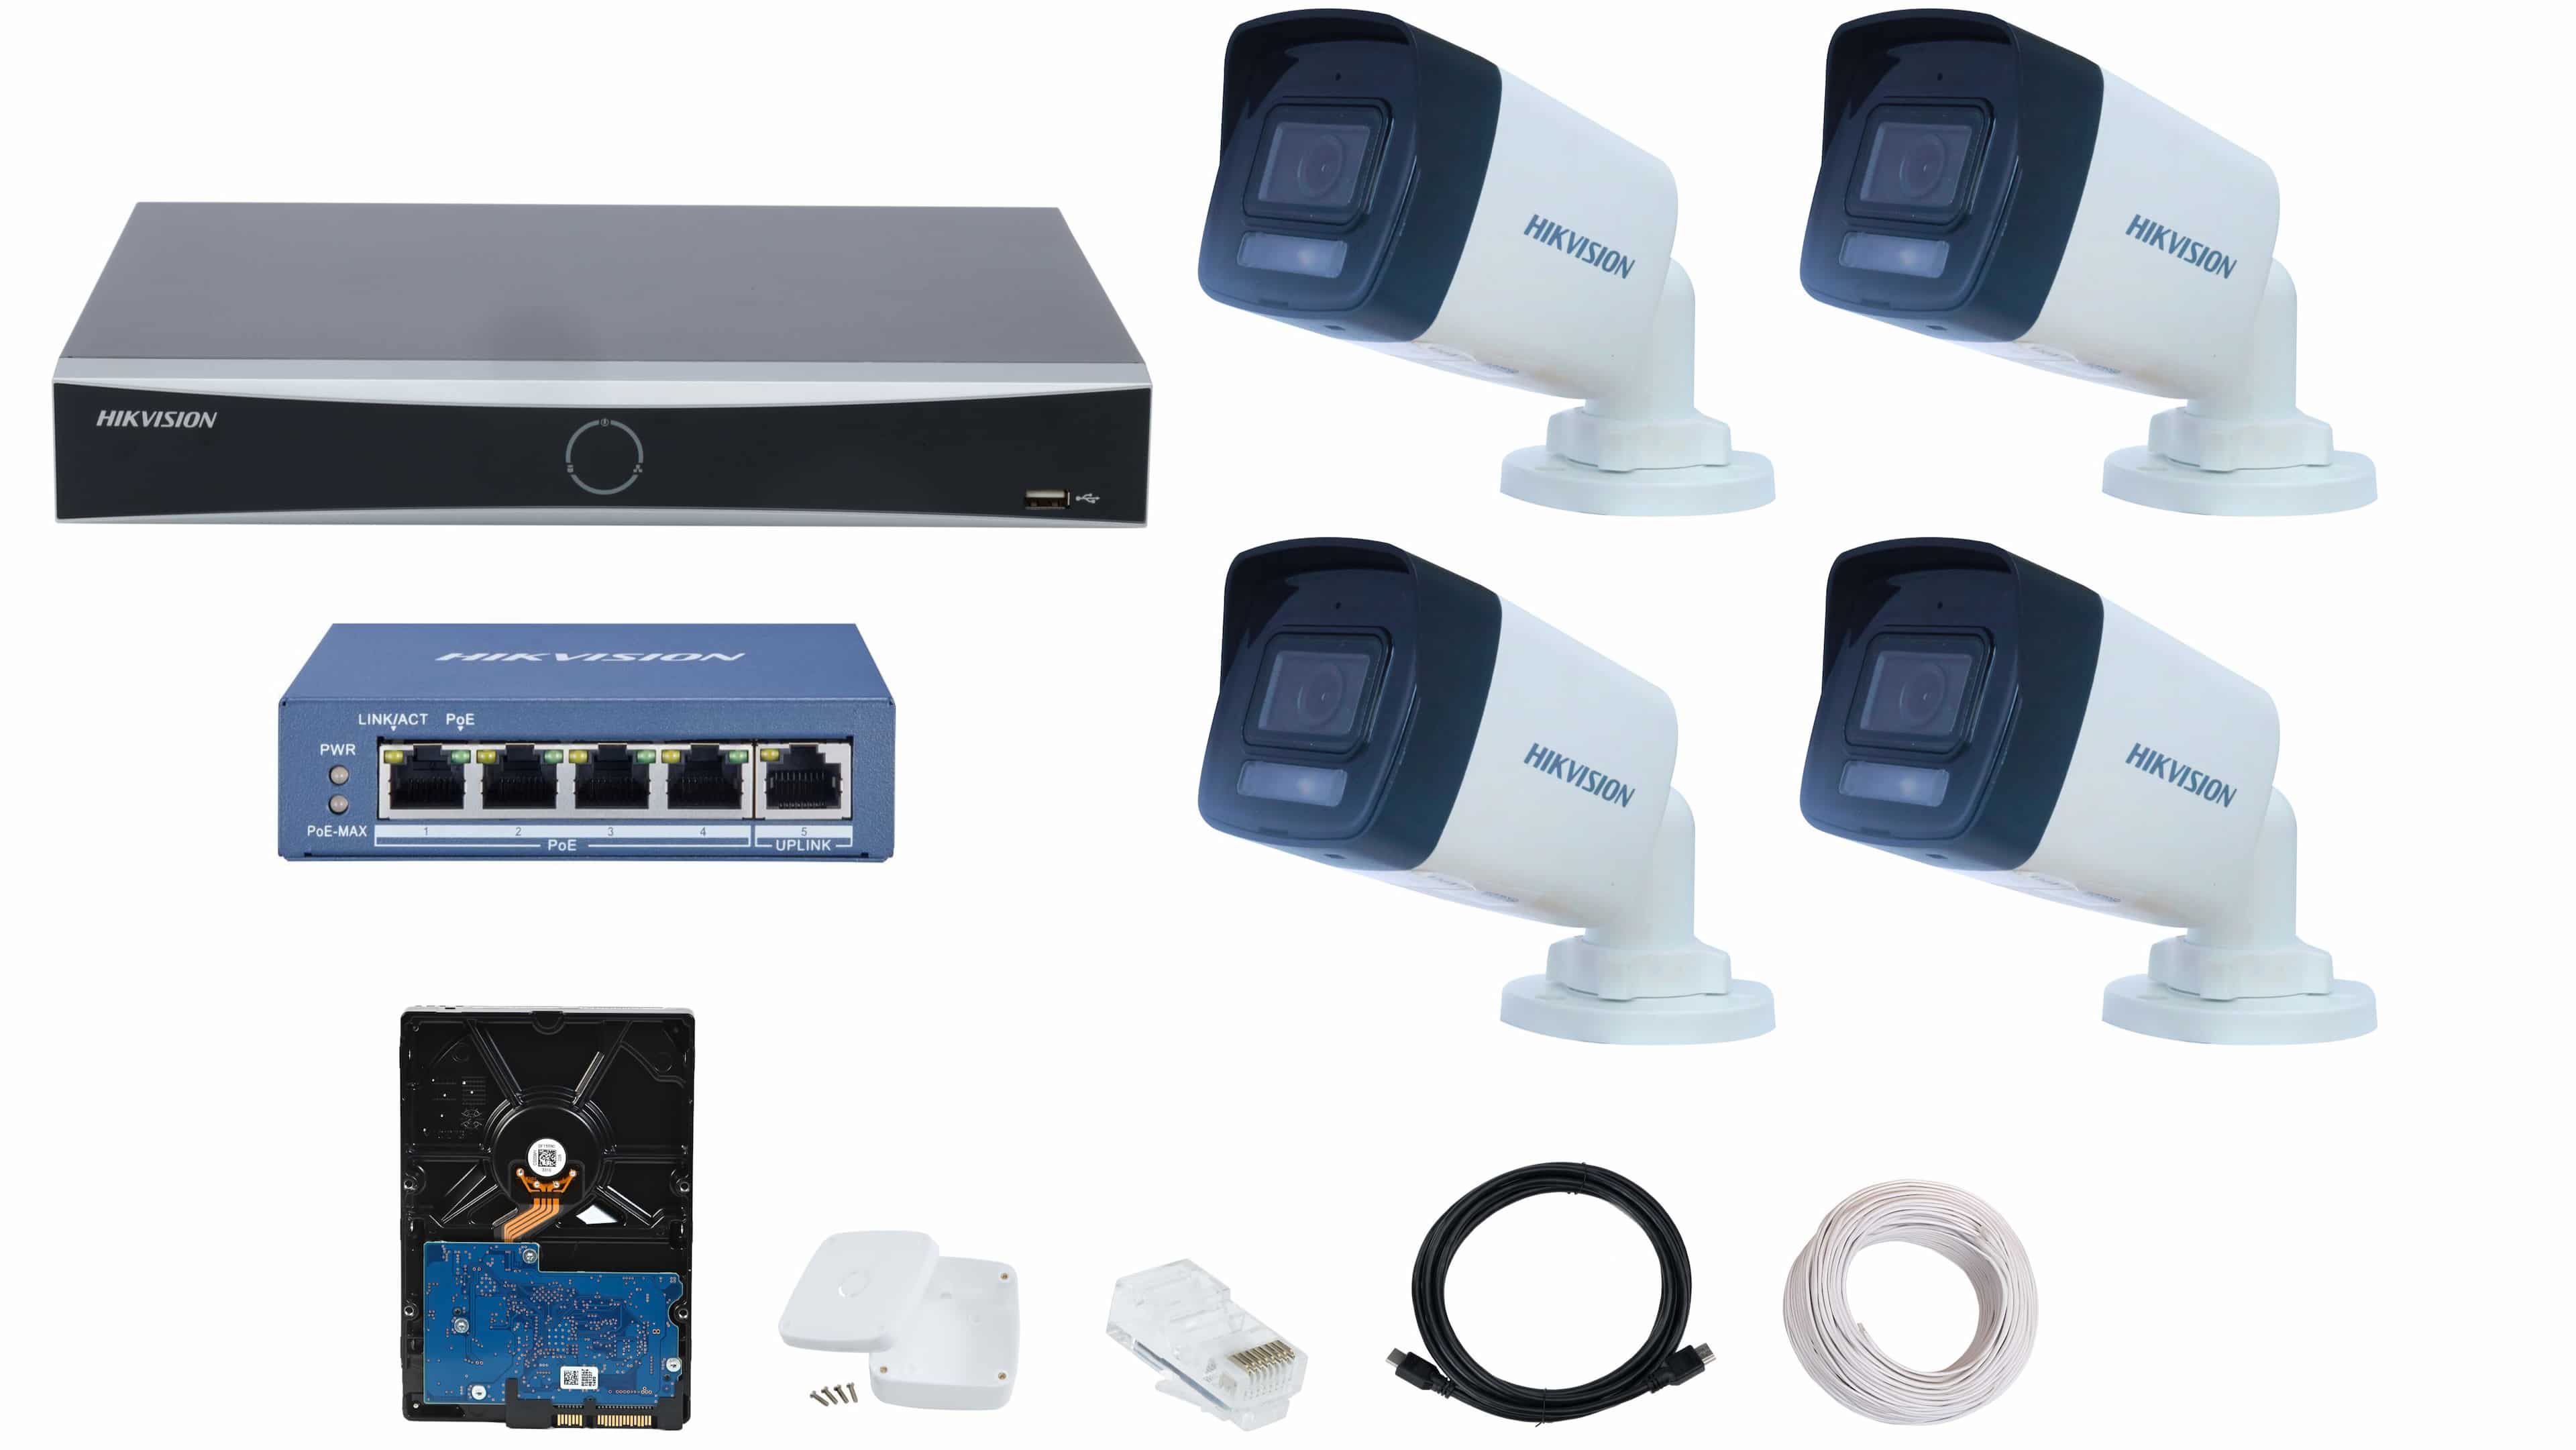 HIKVISION 4 CCTV IP Camera Full Set with 4 Channel 4K NVR, 4 × 2MP Hybrid IP Camera, 4 Port PoE Switch, 500GB HDD, RJ45, Cobox, Cat6 90m & HDMI Cables